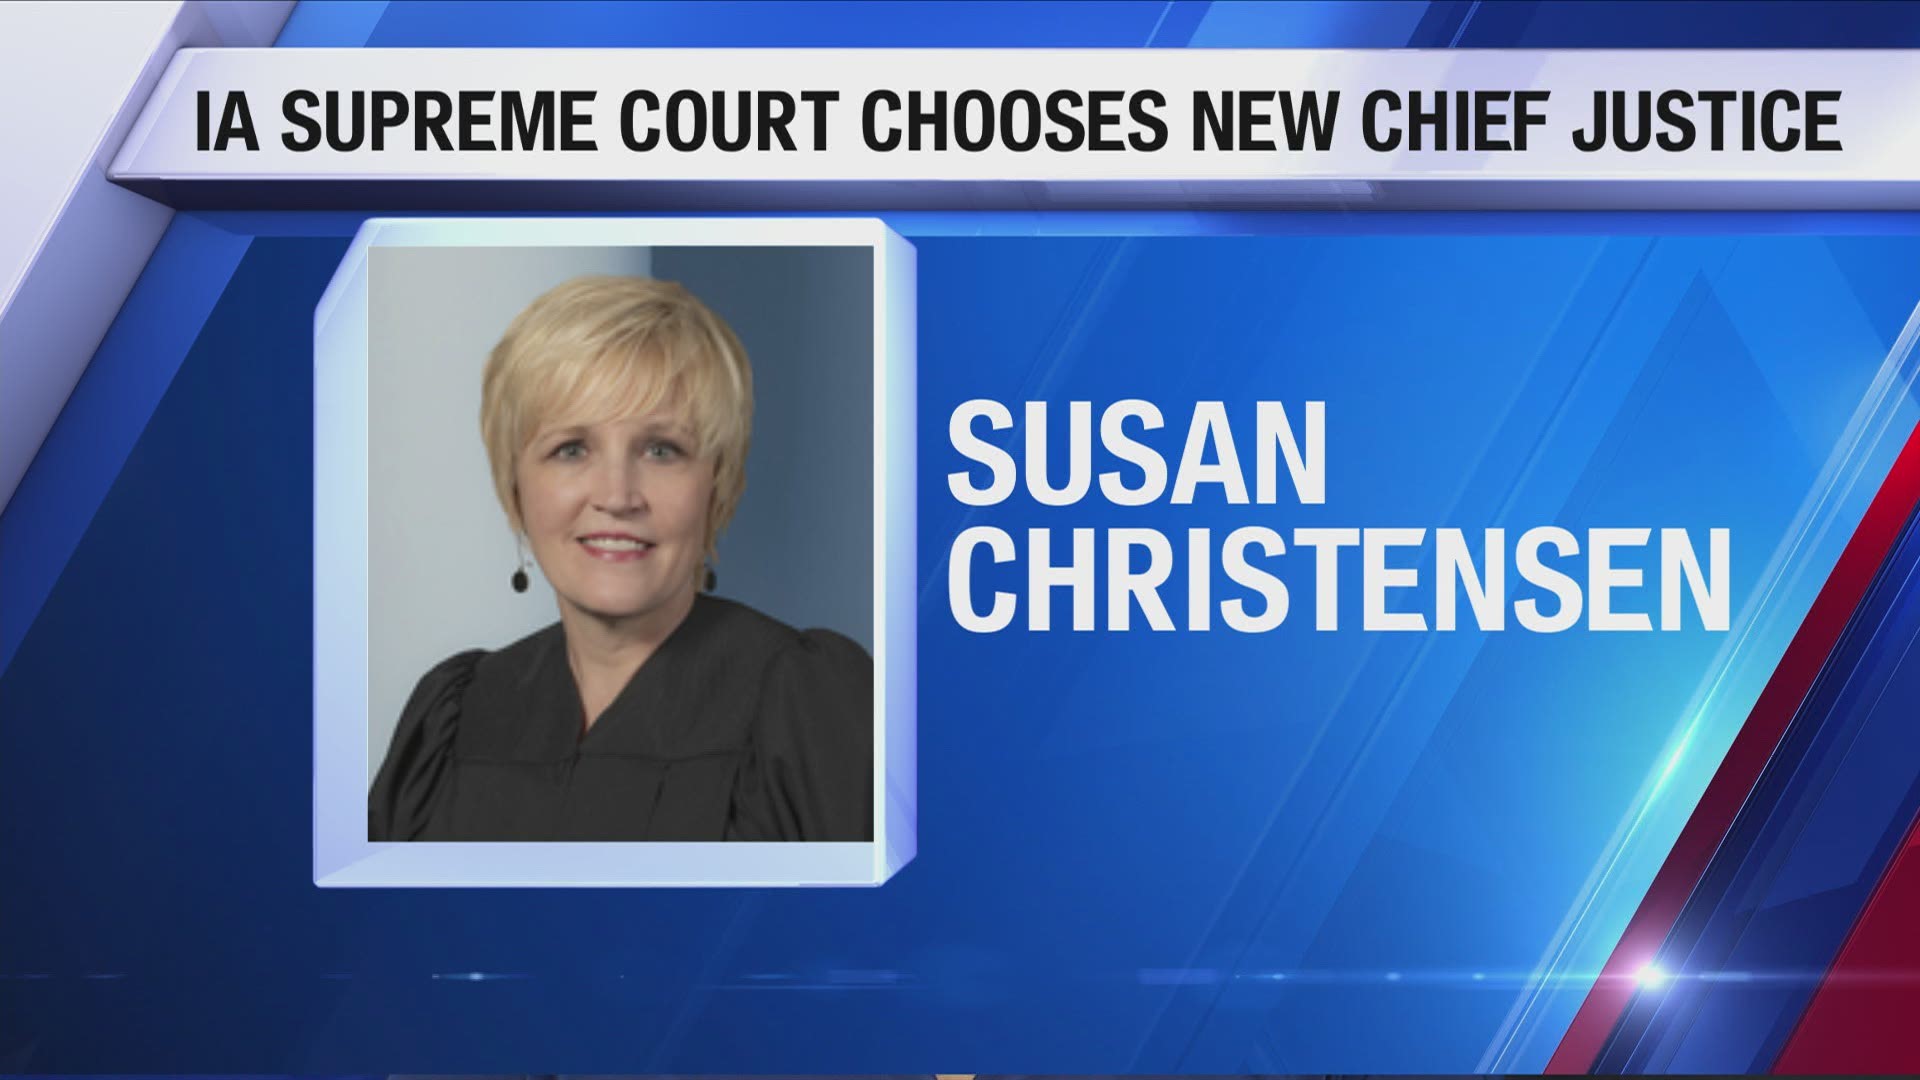 Christensen was appointed to the Iowa Supreme Court by Gov. Reynolds in August 2018